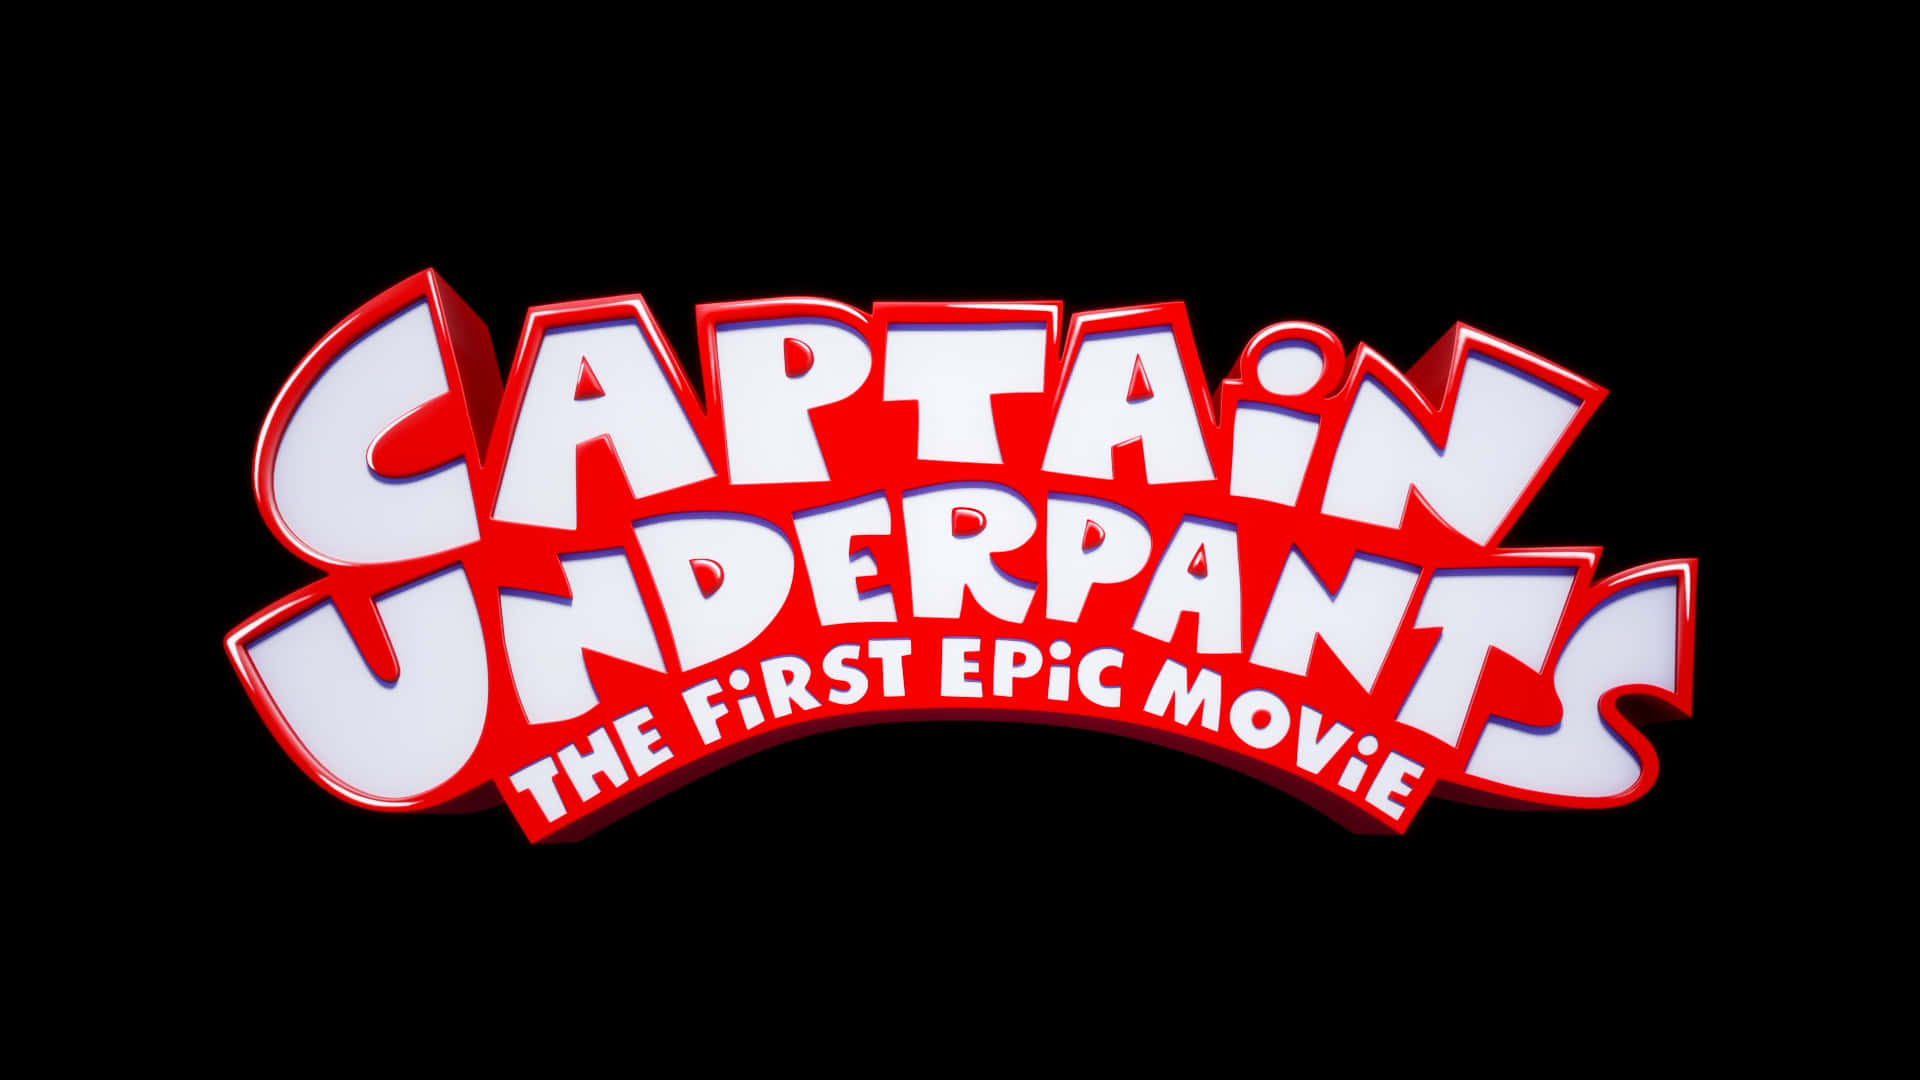 Captain Underpants: The First Epic Movie Logo On Black Wallpaper